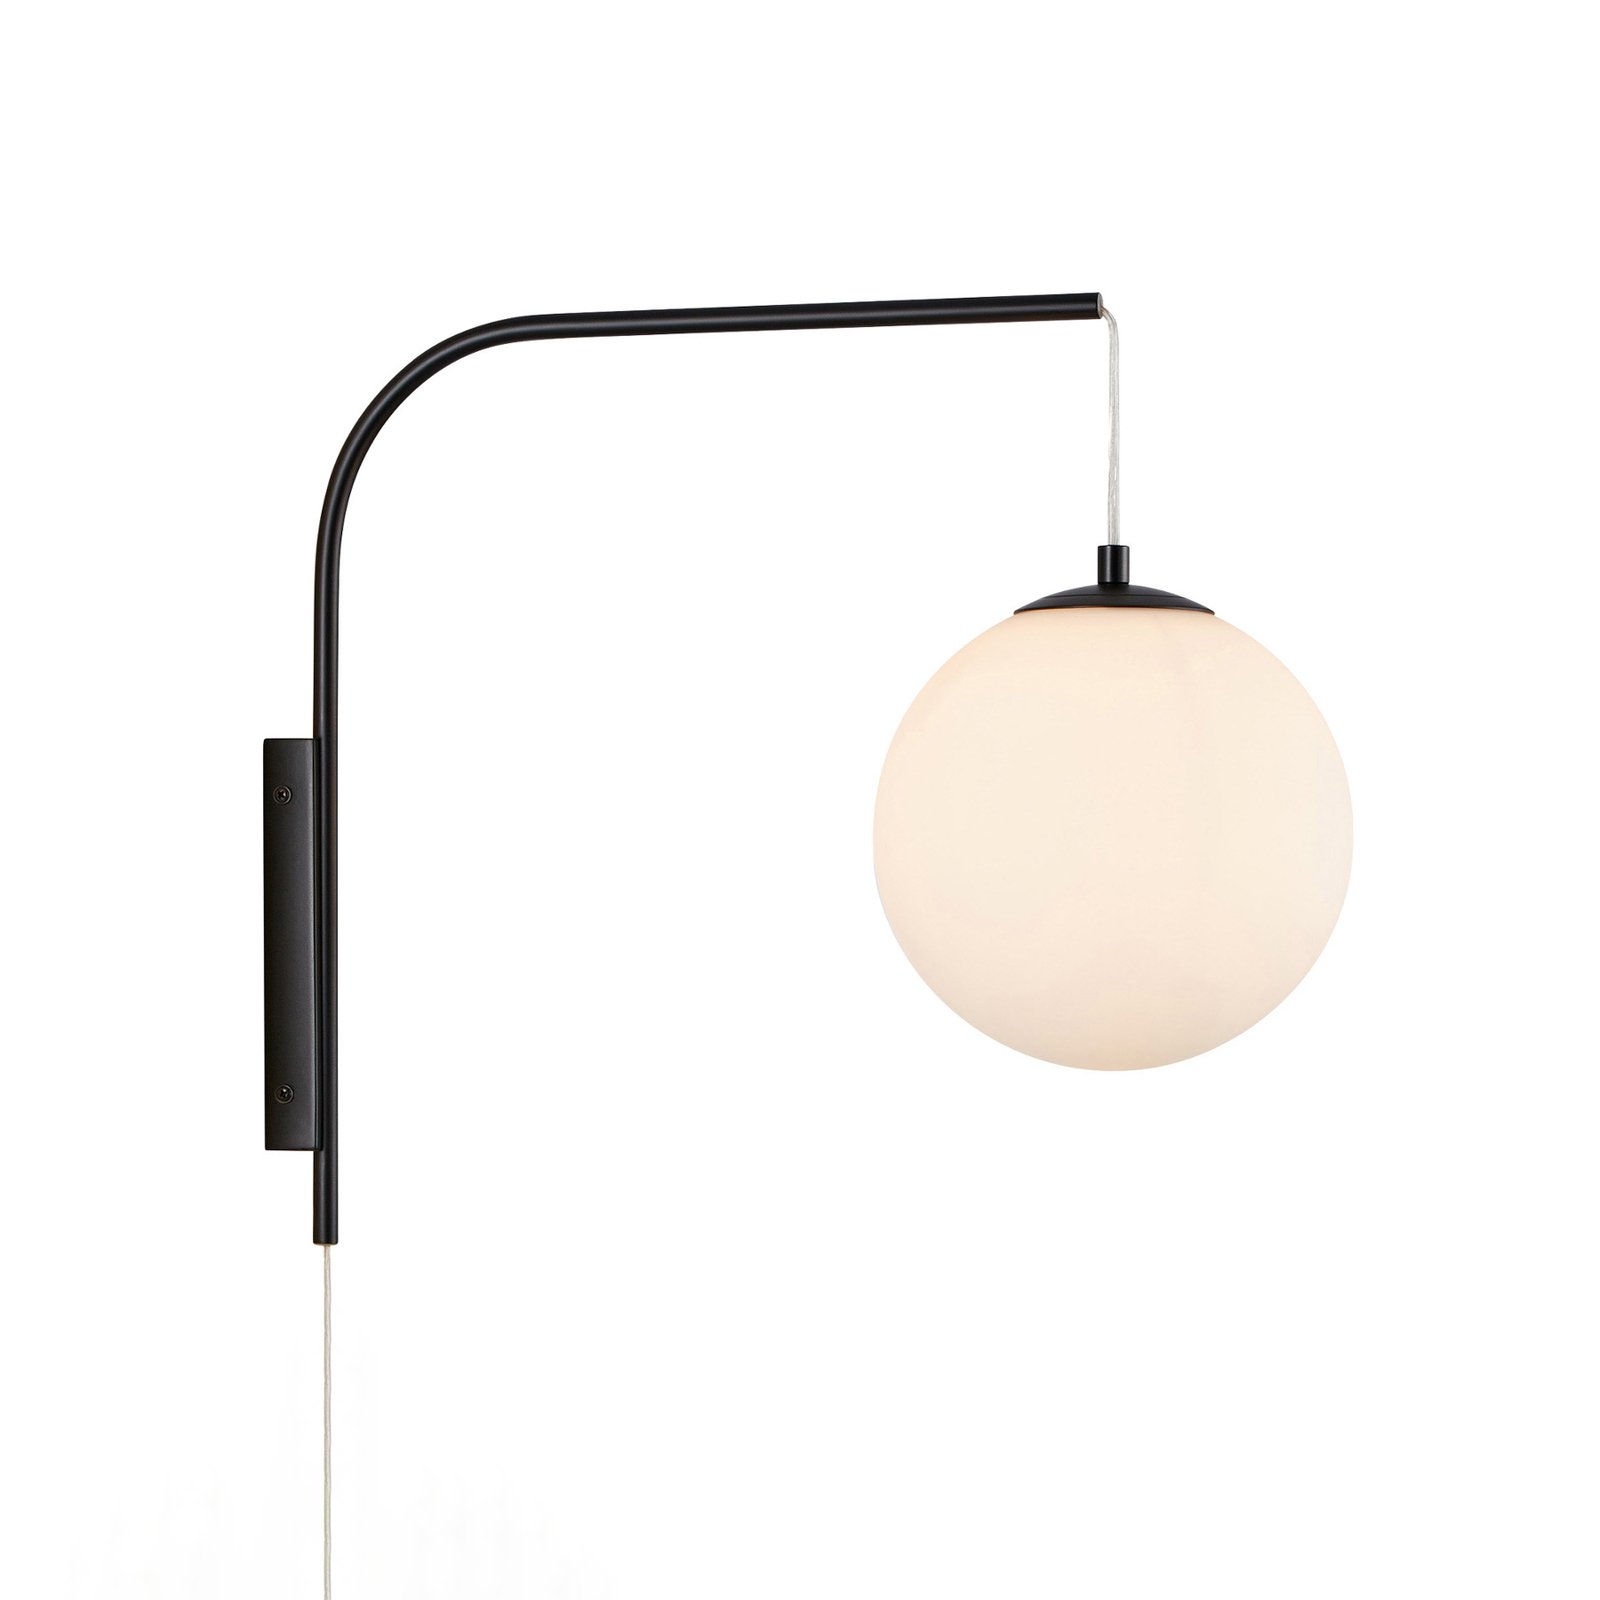 Dione wall light with a plug, black/white